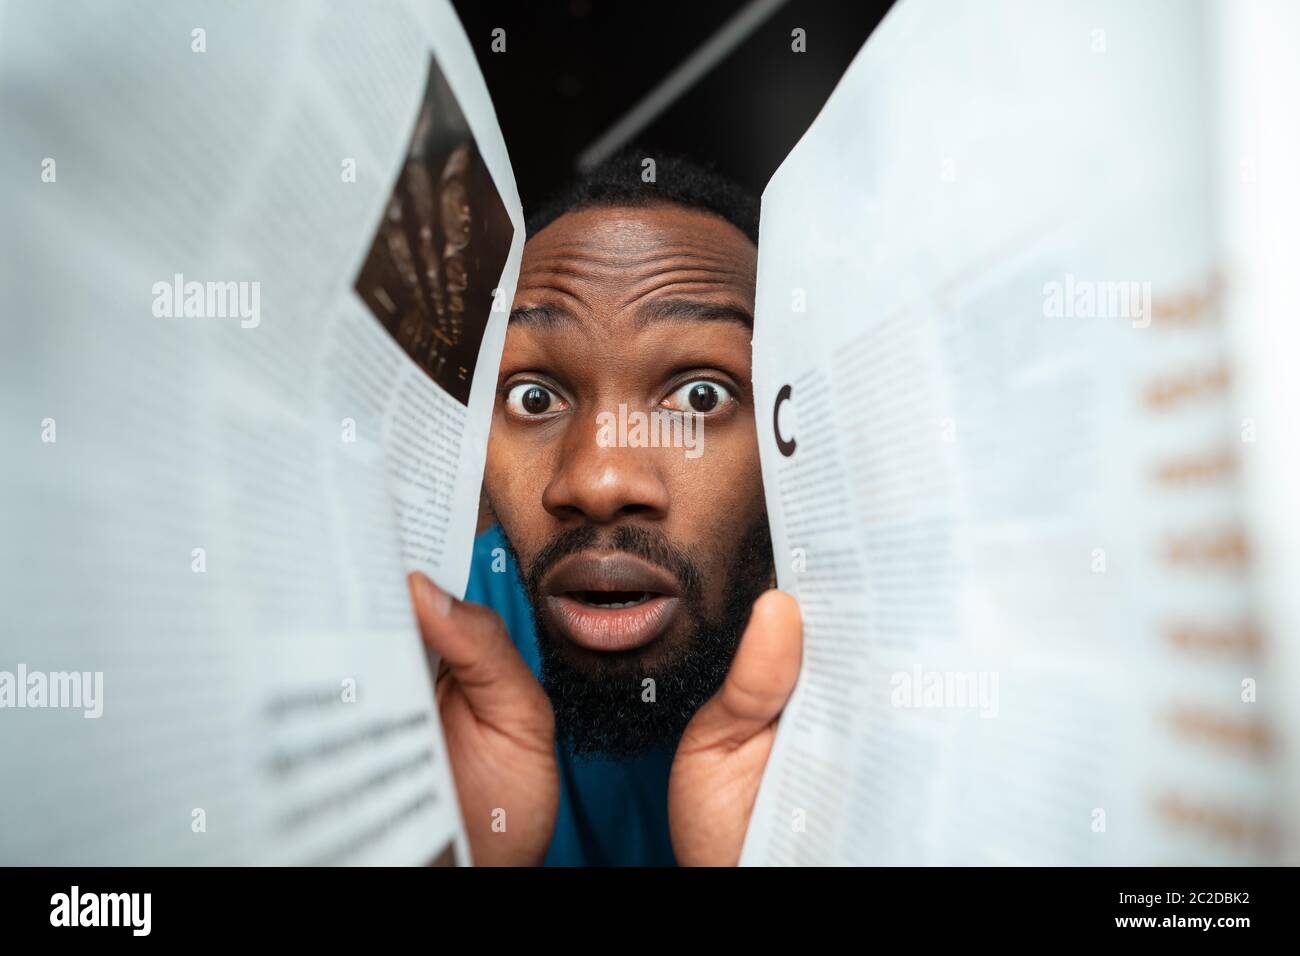 In papers, magazines, books. African-american man looking for job in unusual places at his home. Crazy, funny way to find career and going up. Concept of crisis, unemployment, finance, business. Stock Photo